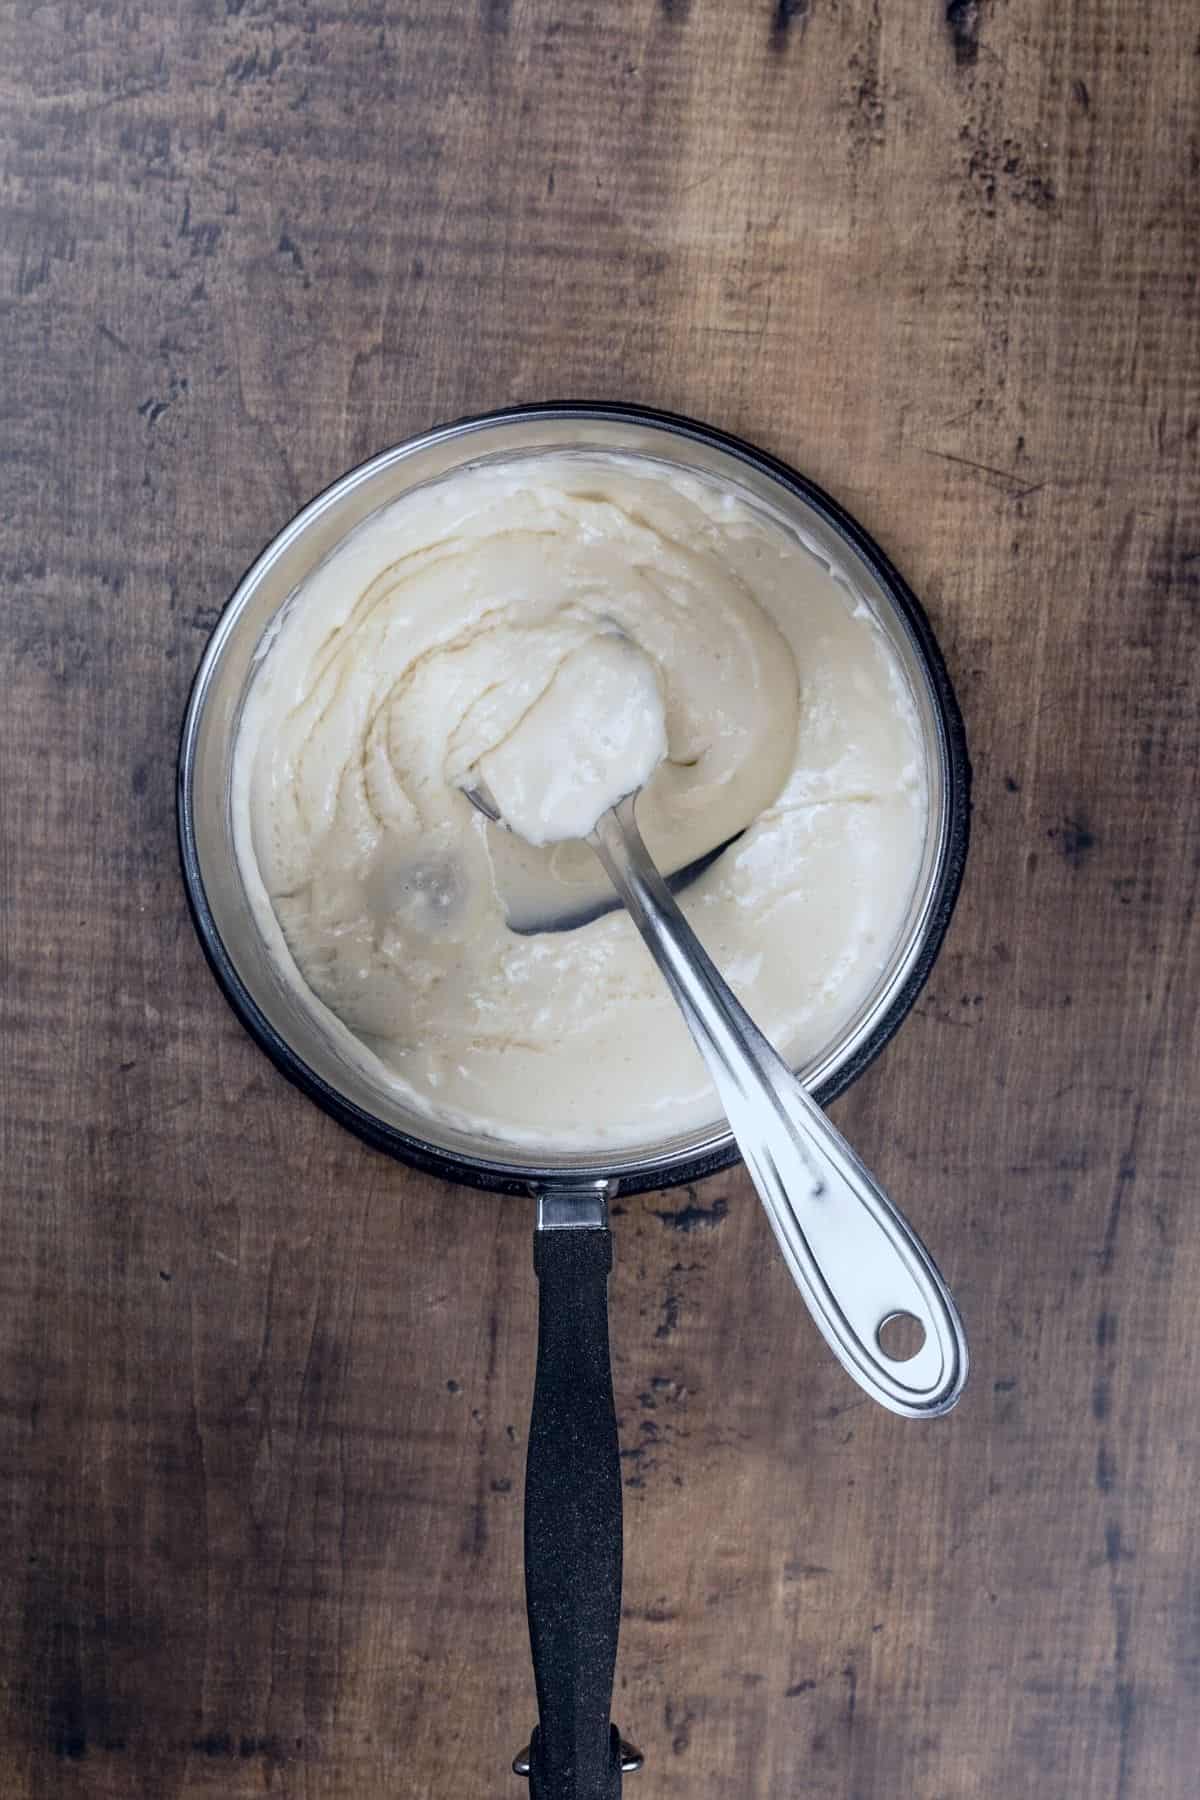 A cooking pot filled with the finished marshmallow frosting. A metal silver spoon rests in the frosting. The pot is on a kitchen table.